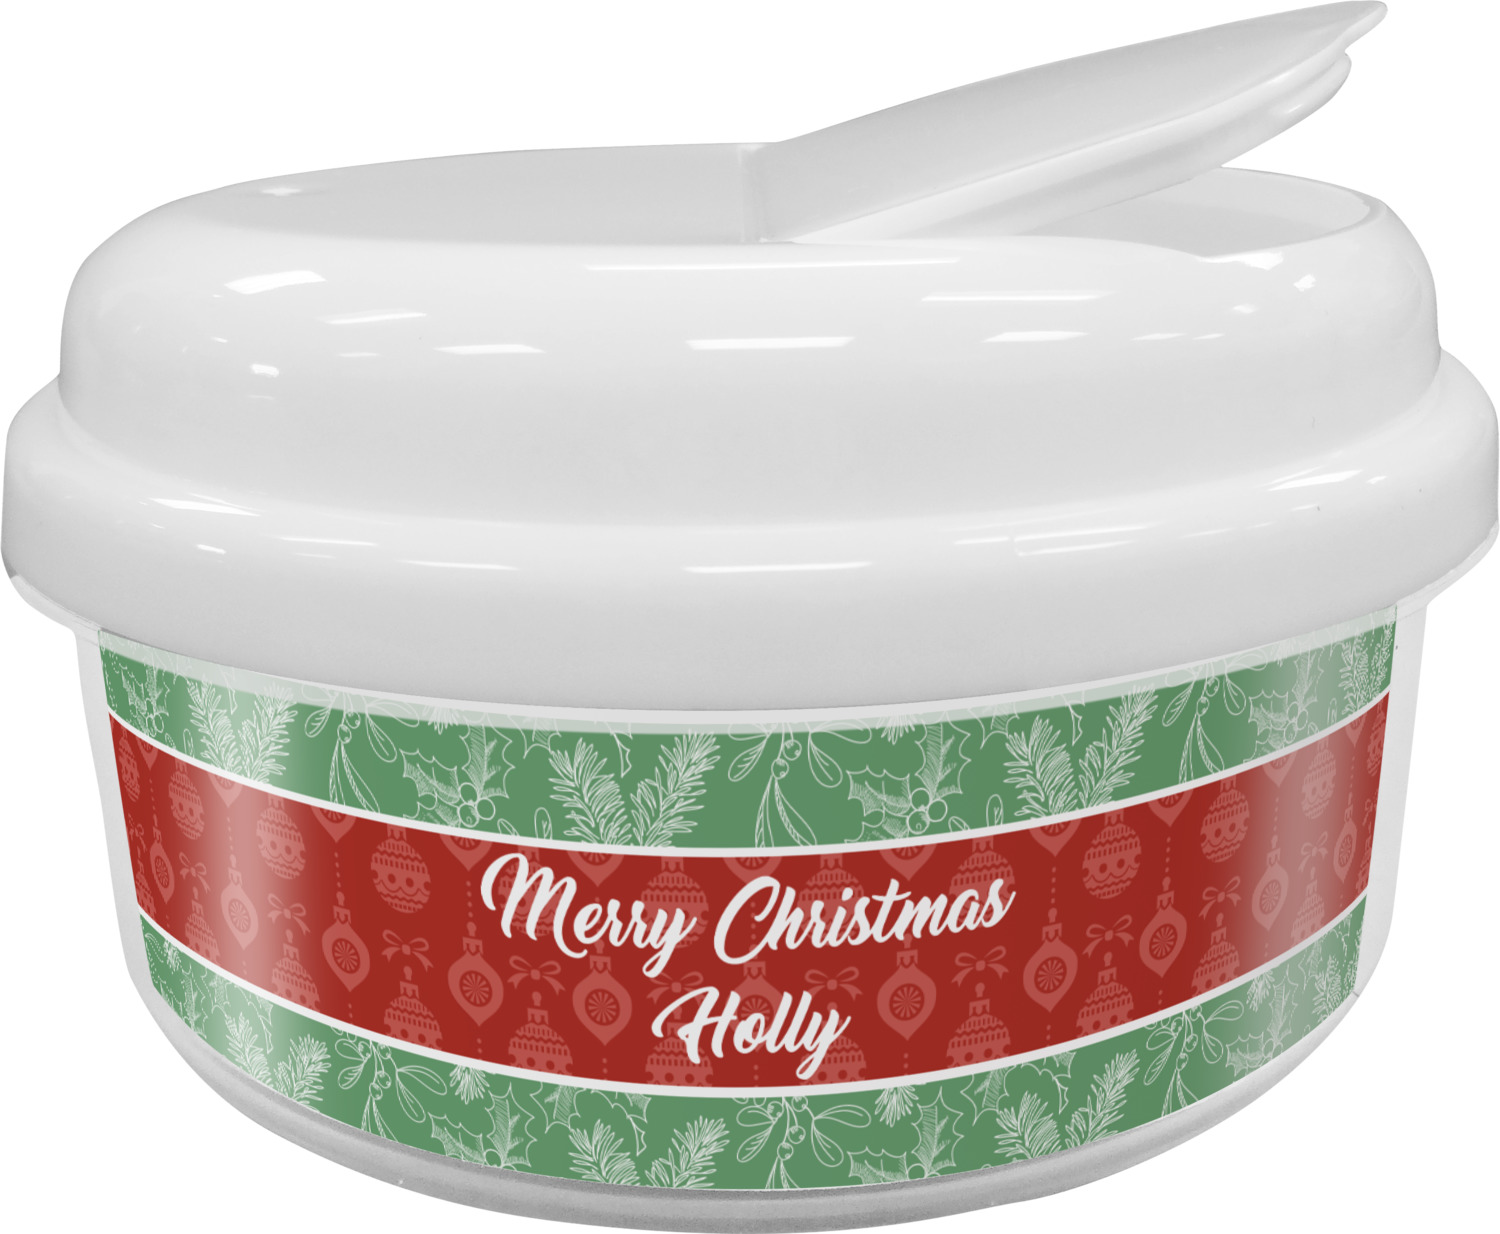 https://www.youcustomizeit.com/common/MAKE/204358/Christmas-Holly-Snack-Container-Personalized-2.jpg?lm=1659776119